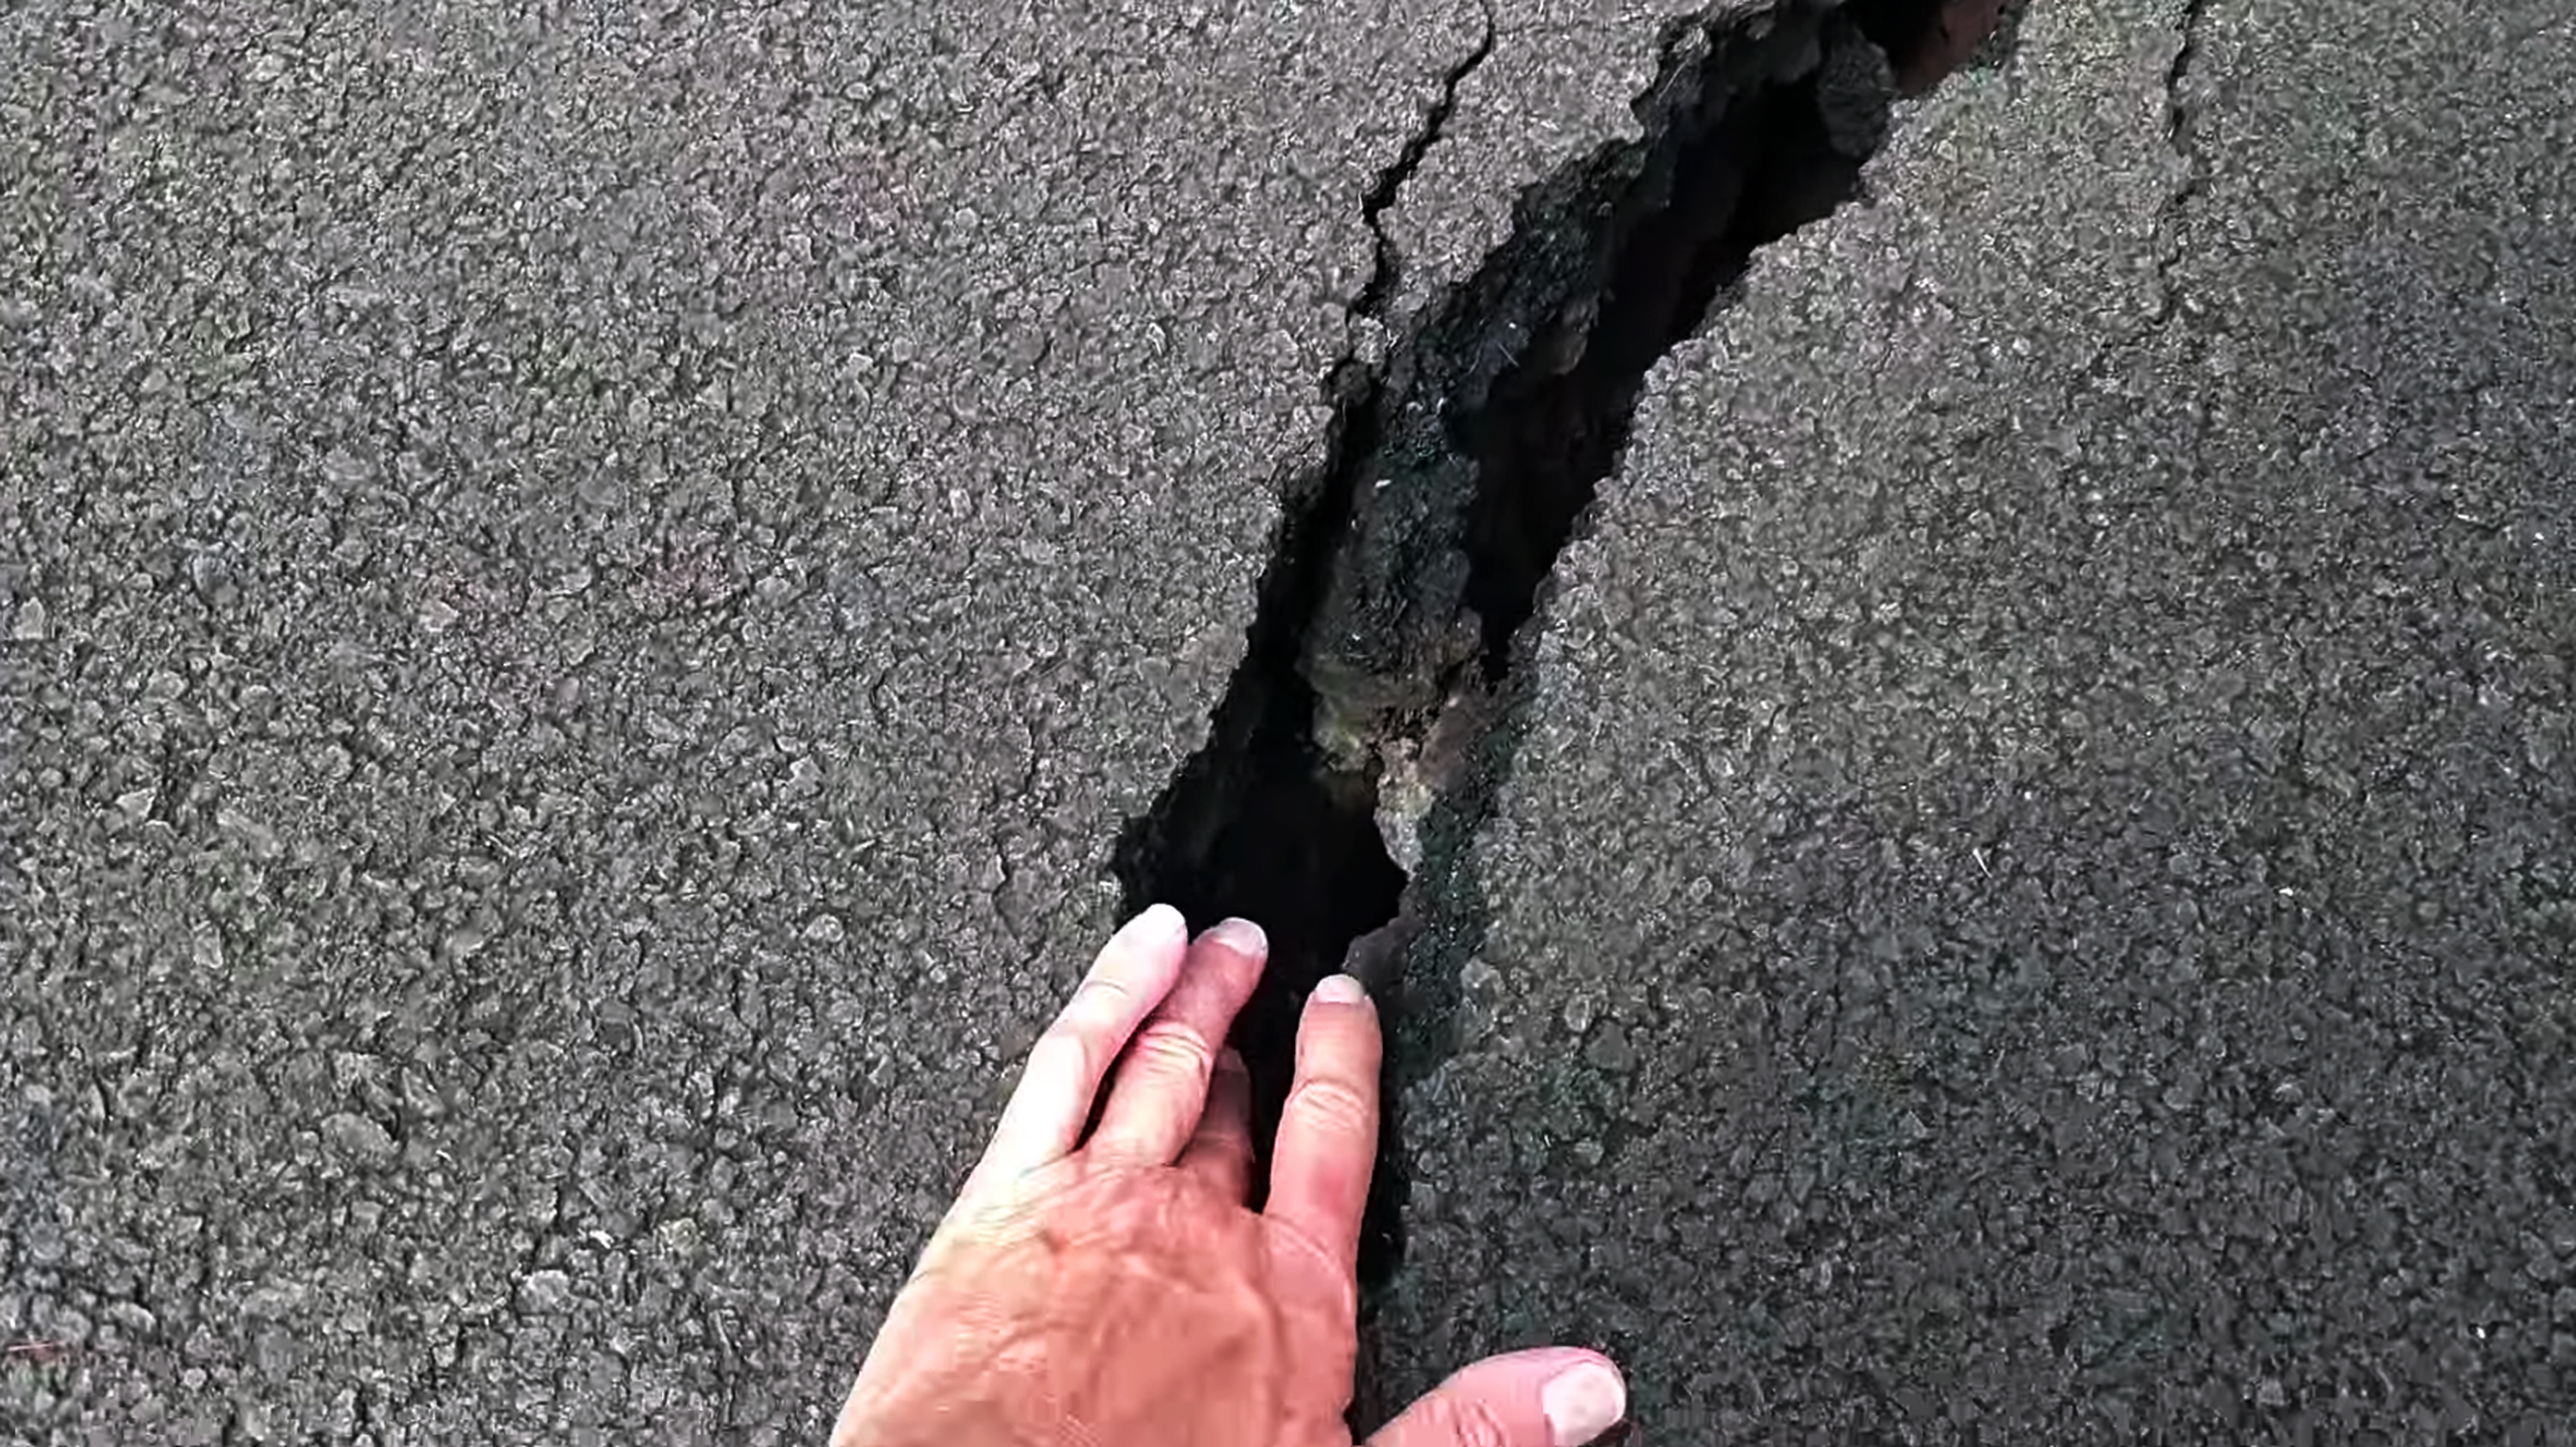 In this photo taken from video Scott Wiggers, of Apau Hawaii Tours, feels warmth from a fissure in a road in the Leilani Estates subdivision near Pahoa on the island of Hawaii Monday, May 7, 2018. Kilauea volcano has destroyed more than two dozen homes since it began spewing lava hundreds of feet into the air last week, and residents who evacuated don't know how long they might be displaced. The decimated homes were in the Leilani Estates subdivision, where molten rock, toxic gas and steam have been bursting through openings in the ground created by the volcano. (Scott Wiggers/Apau Hawaii Tours via AP)